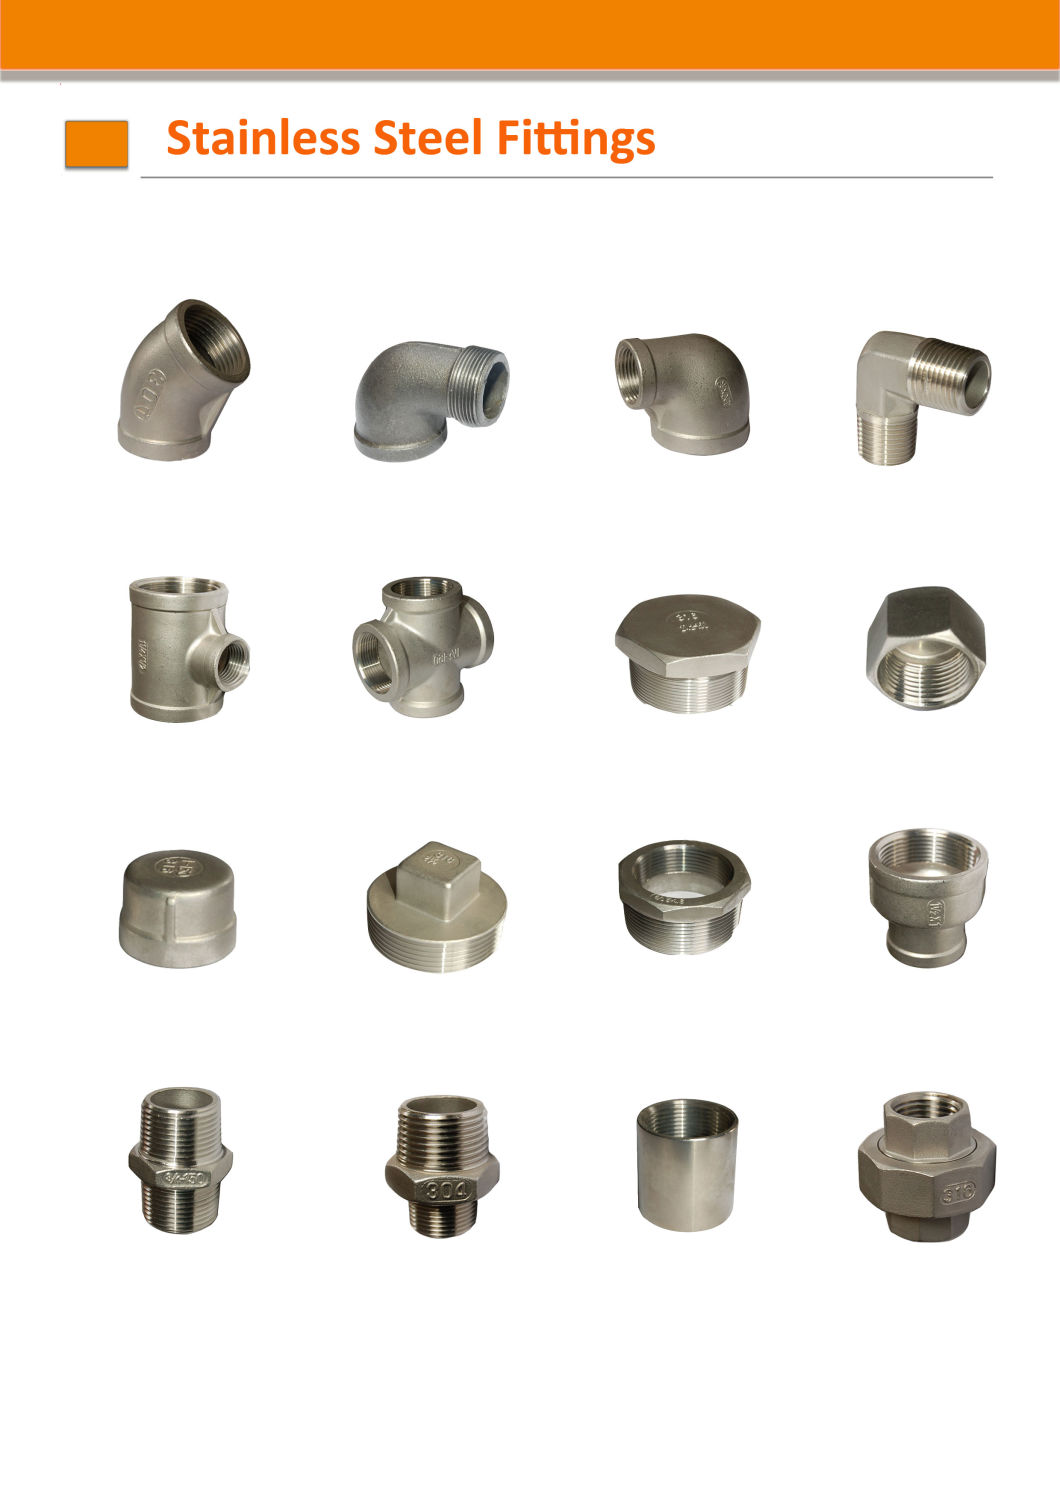 Casting Stainless Steel NPT/Bsp Threaded 150lbs Fittings Elbow